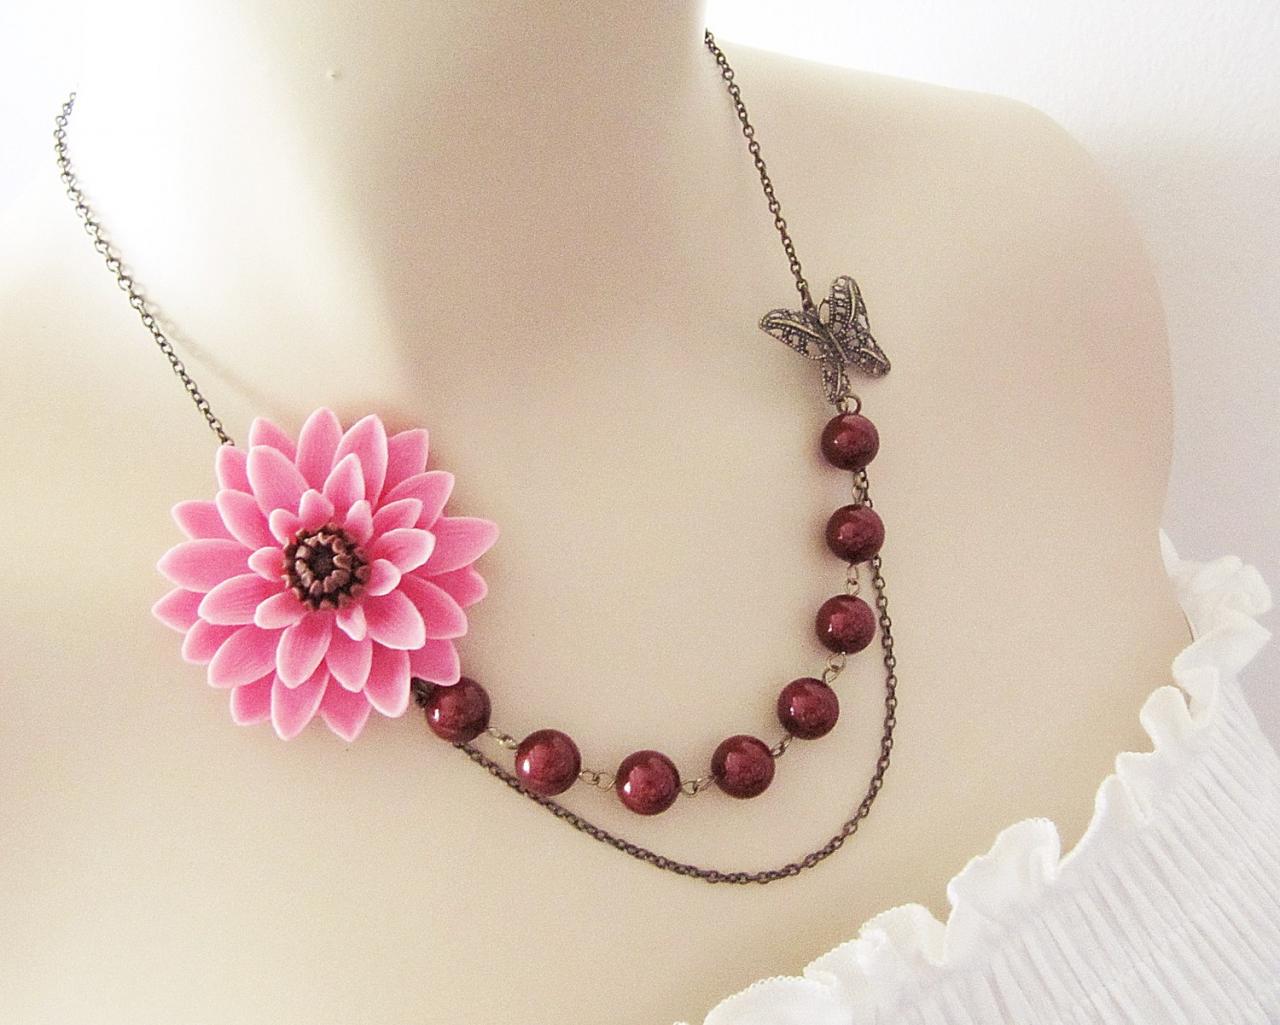 Sachet Pink with Brown Chrysanthemum Flower Cabochon, Antique Brass Butterfly charm and Maroon Swarovski Pearls Necklace